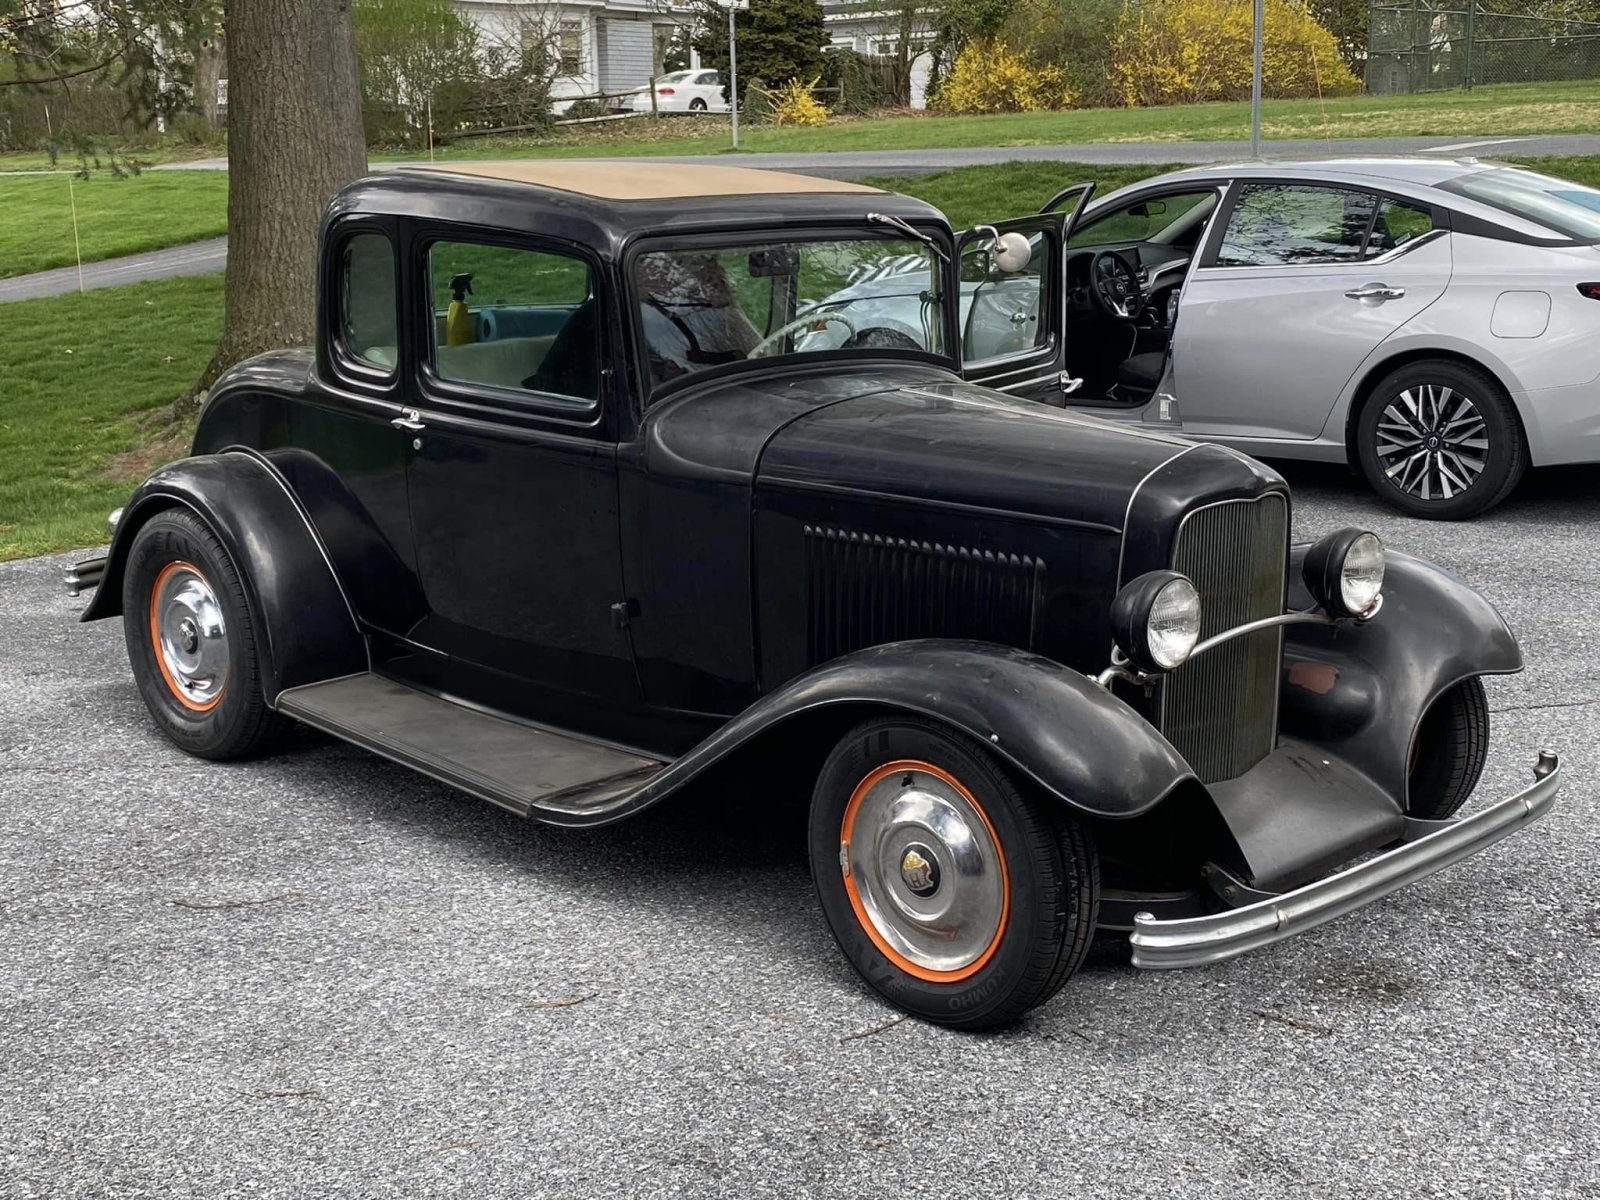 Features - The Ott Family Deuce 5wd Coupe: A Reunion Story | The H.A.M.B.